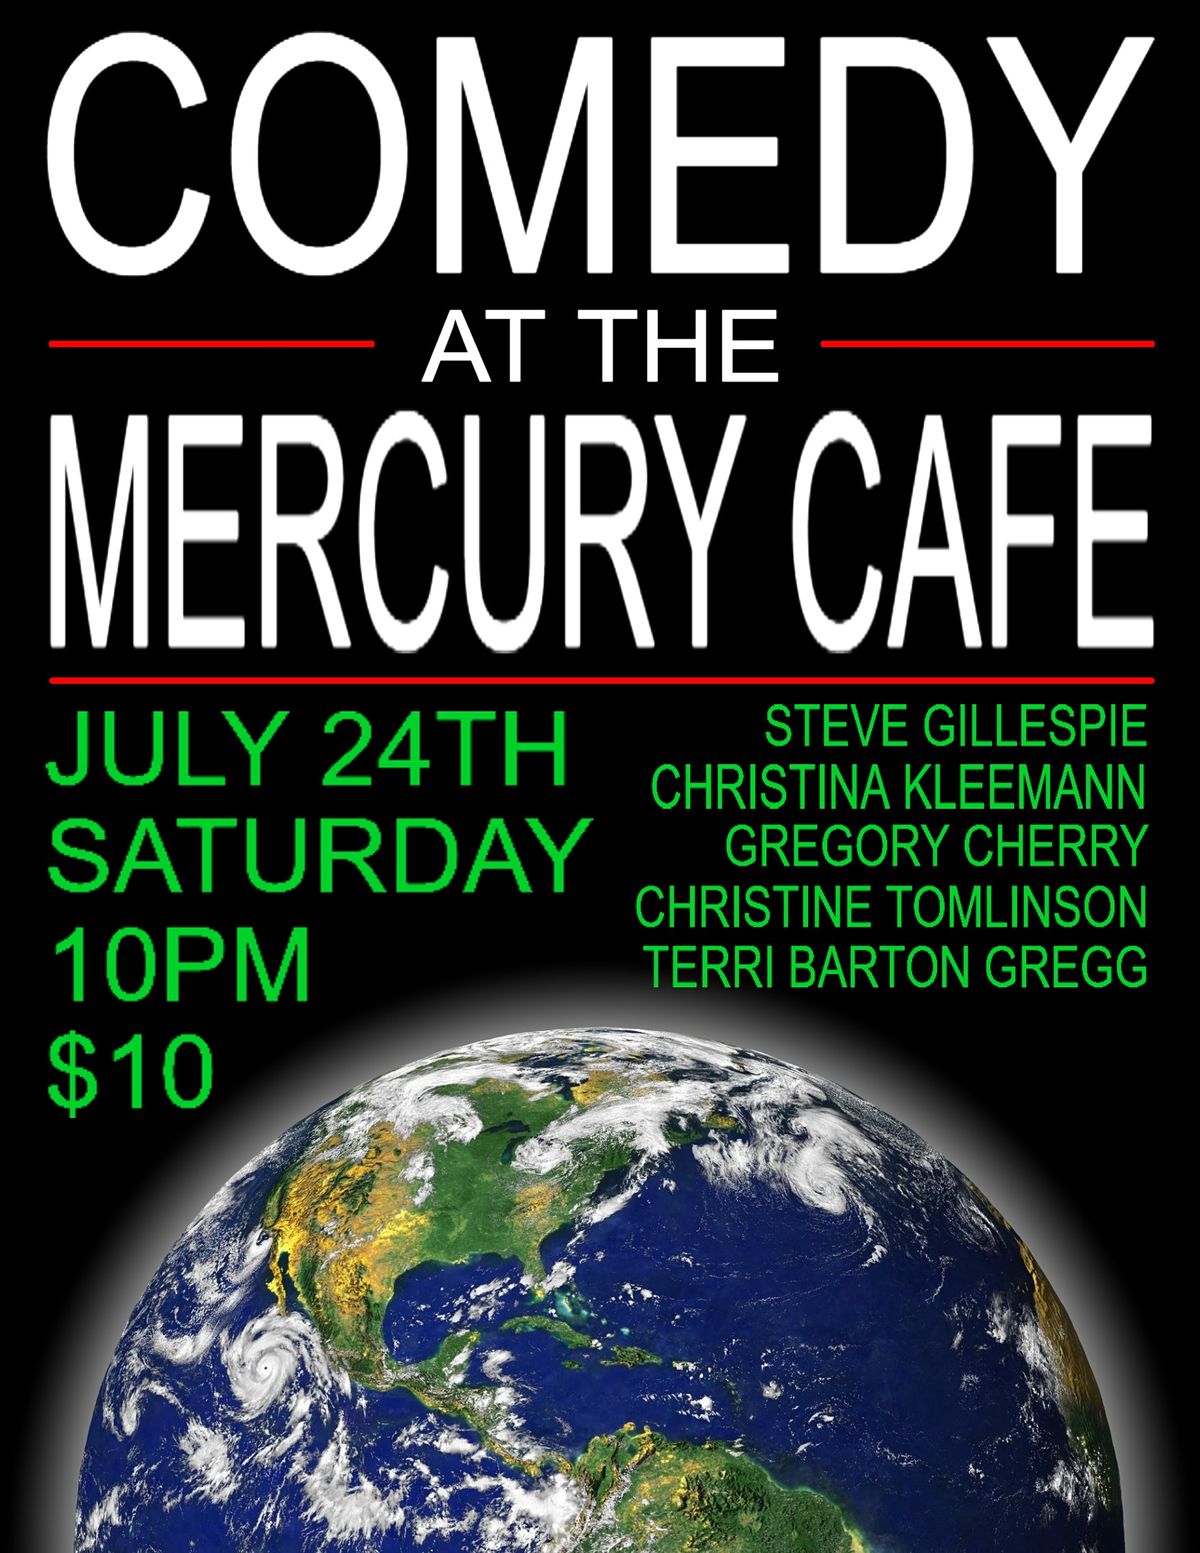 Comedy at the Mercury Cafe